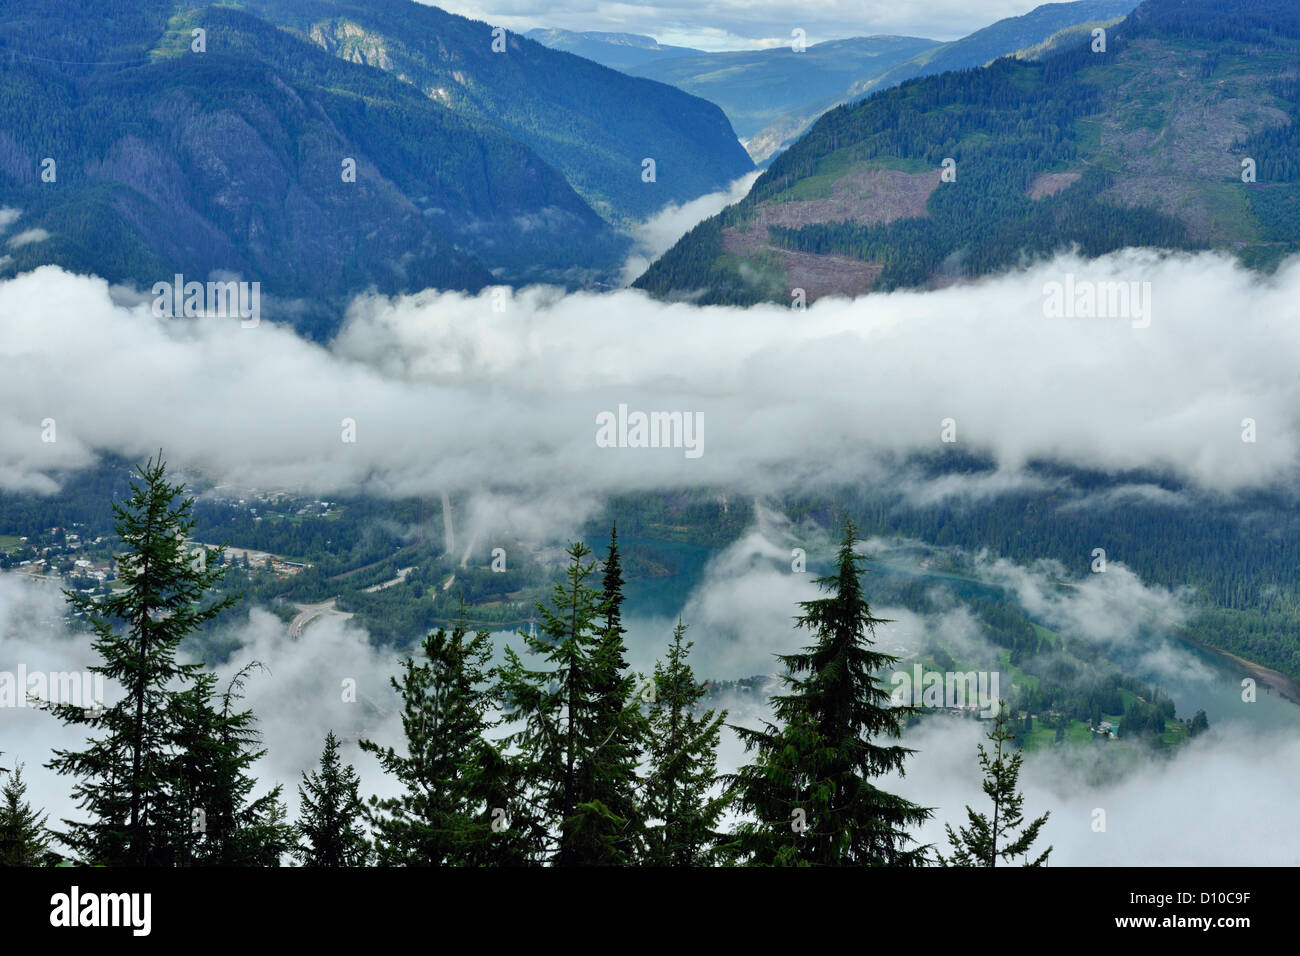 Columbia River Valley from the Meadows in the Sky Parkway, Mount Revelstoke National Park, British Columbia, Canada Stock Photo